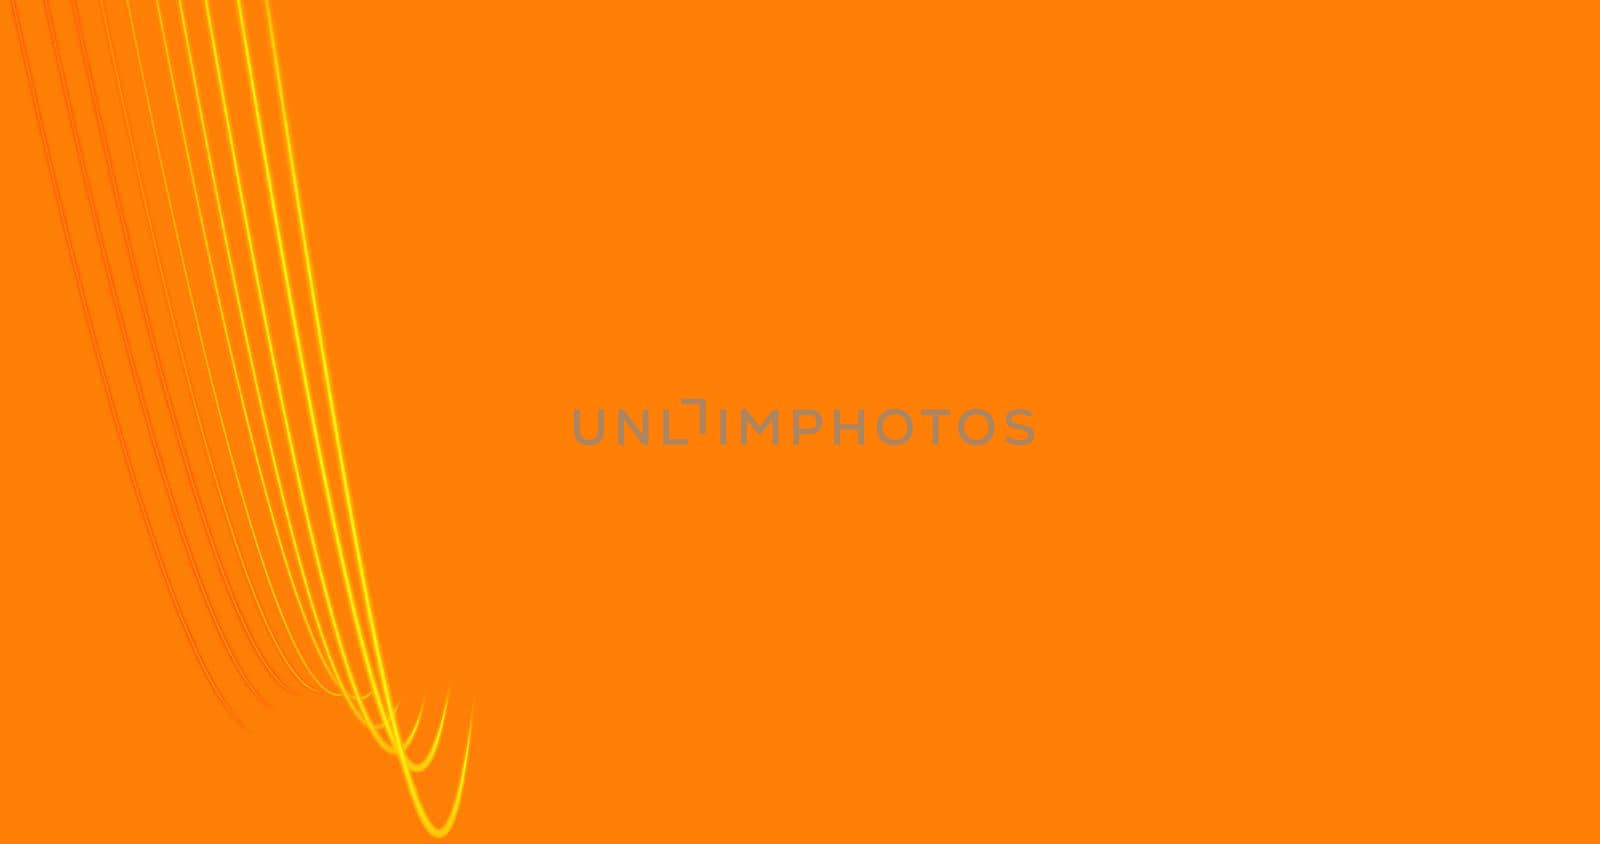 Abstract orange background with dynamic 3d lines. orange and yellow lines on an orange background. Modern autumn background, copy space.